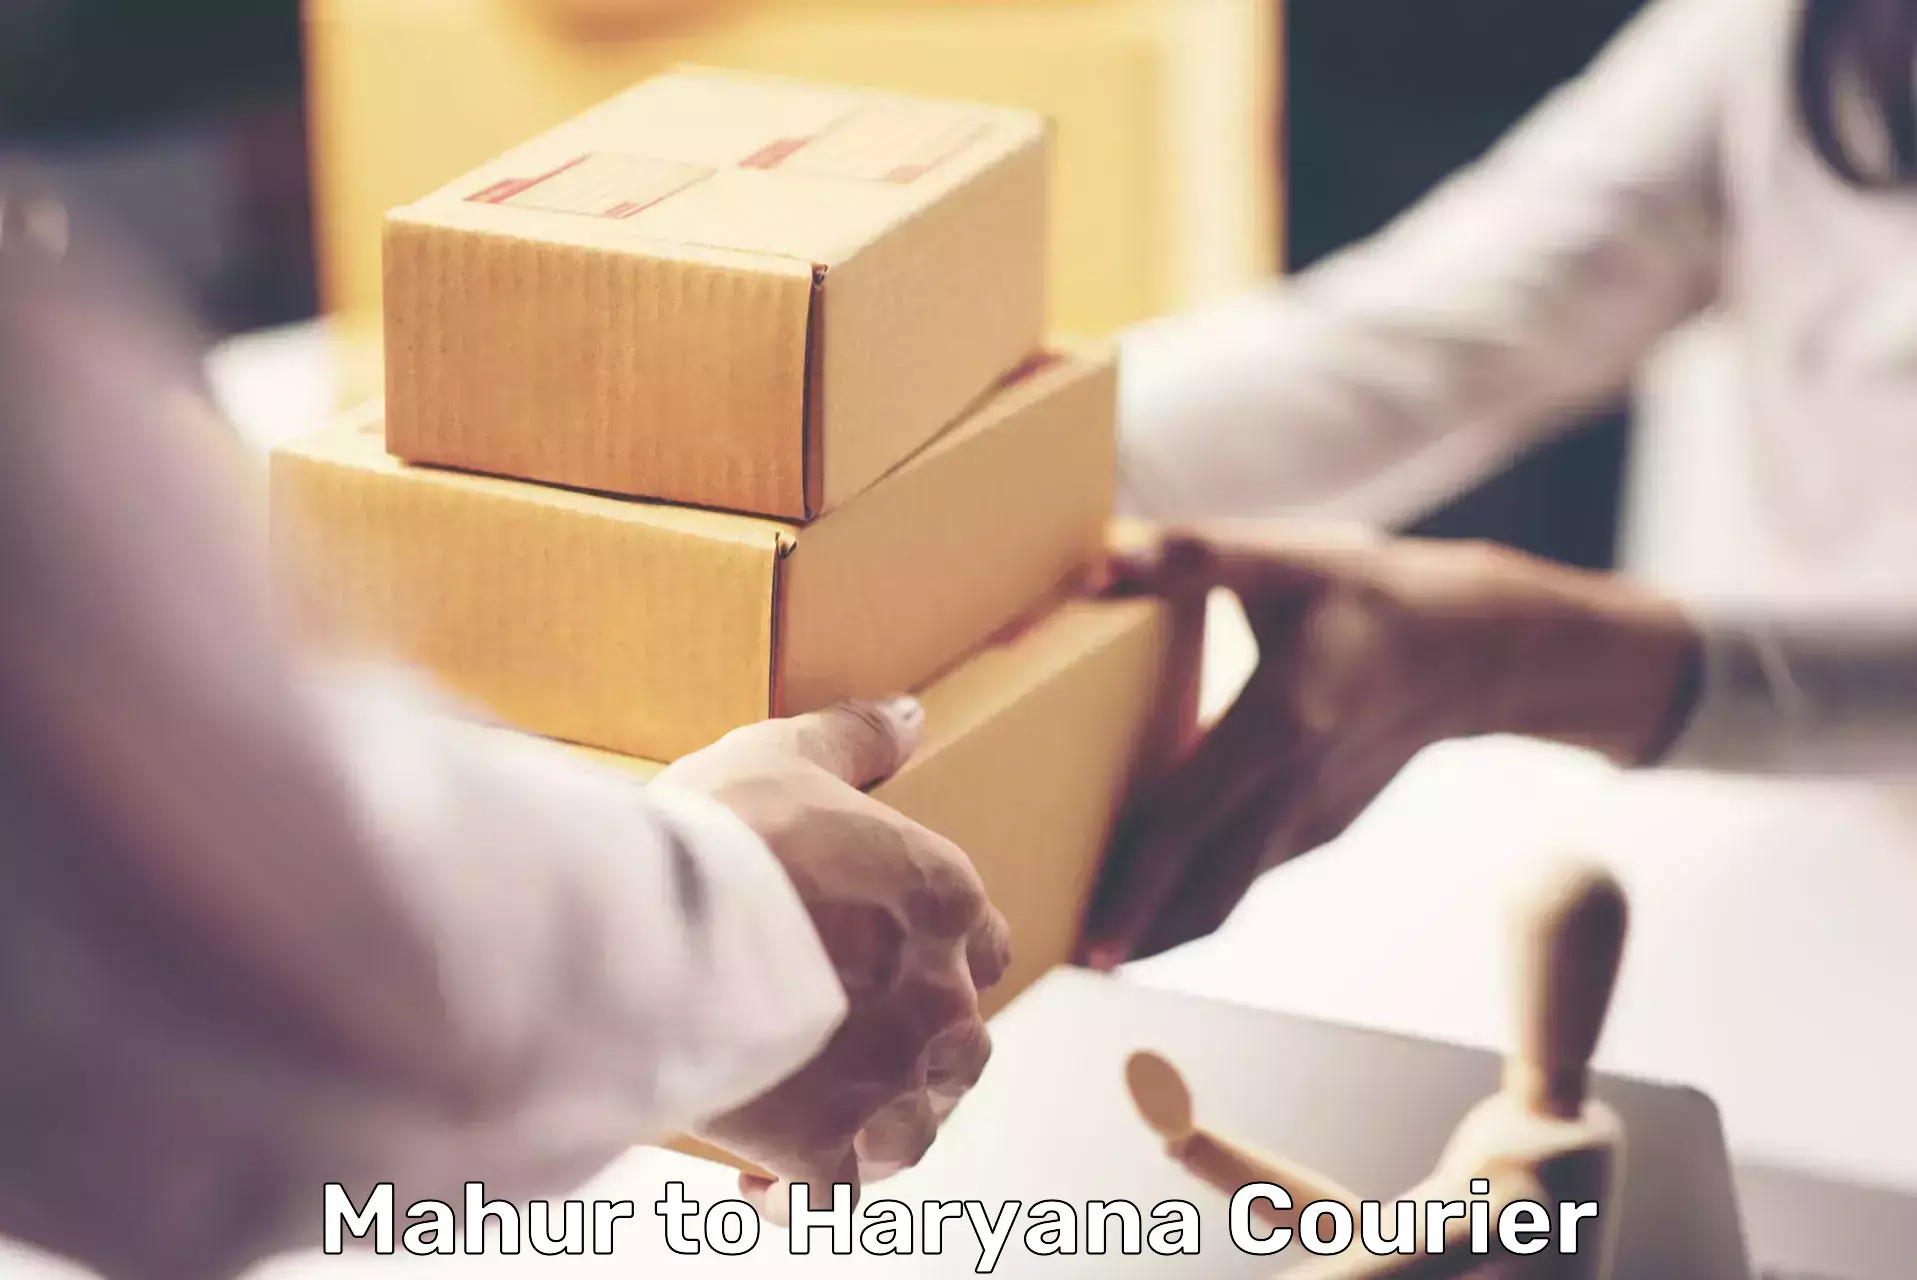 24/7 courier service in Mahur to NCR Haryana